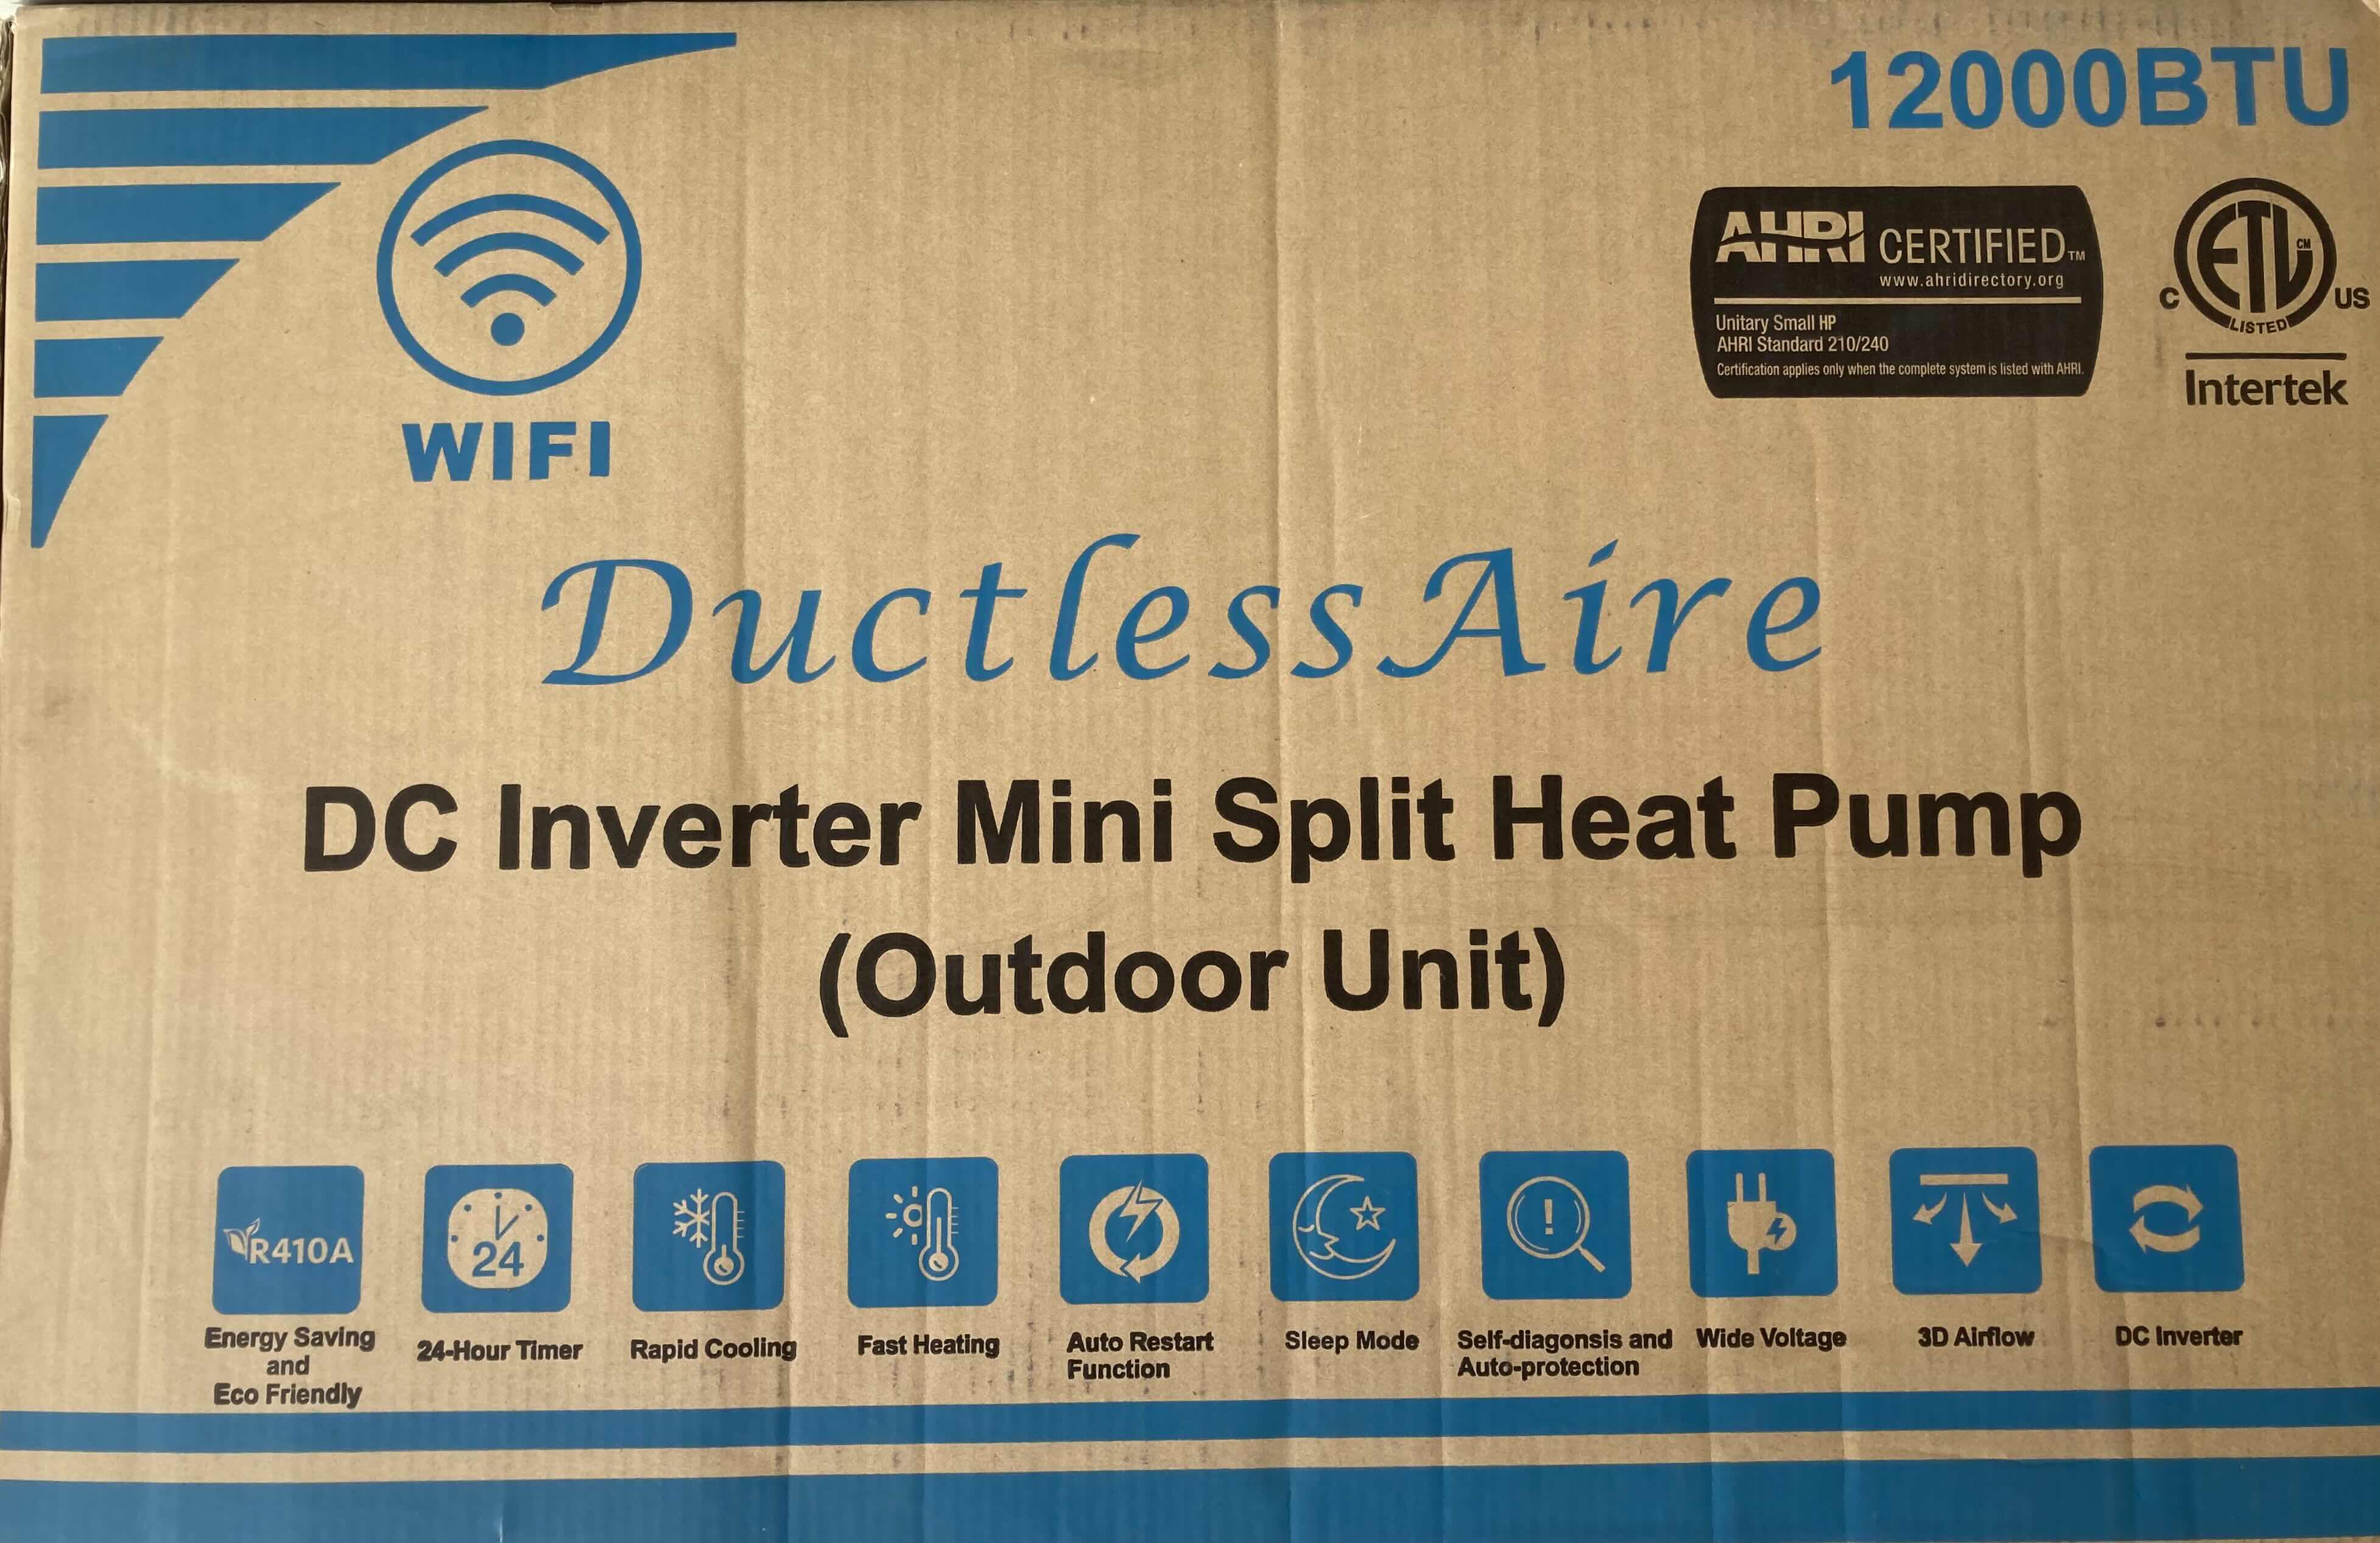 Photo 2 of DUCTLESS AIRE OUTDOOR DC INVERTER MINI SPLIT HEAT PUMP 12000BTU 208/230V 60HZ 1PH WIFI CONNECTION MODEL KA-1219-O (OUTDOOR UNIT ONLY)